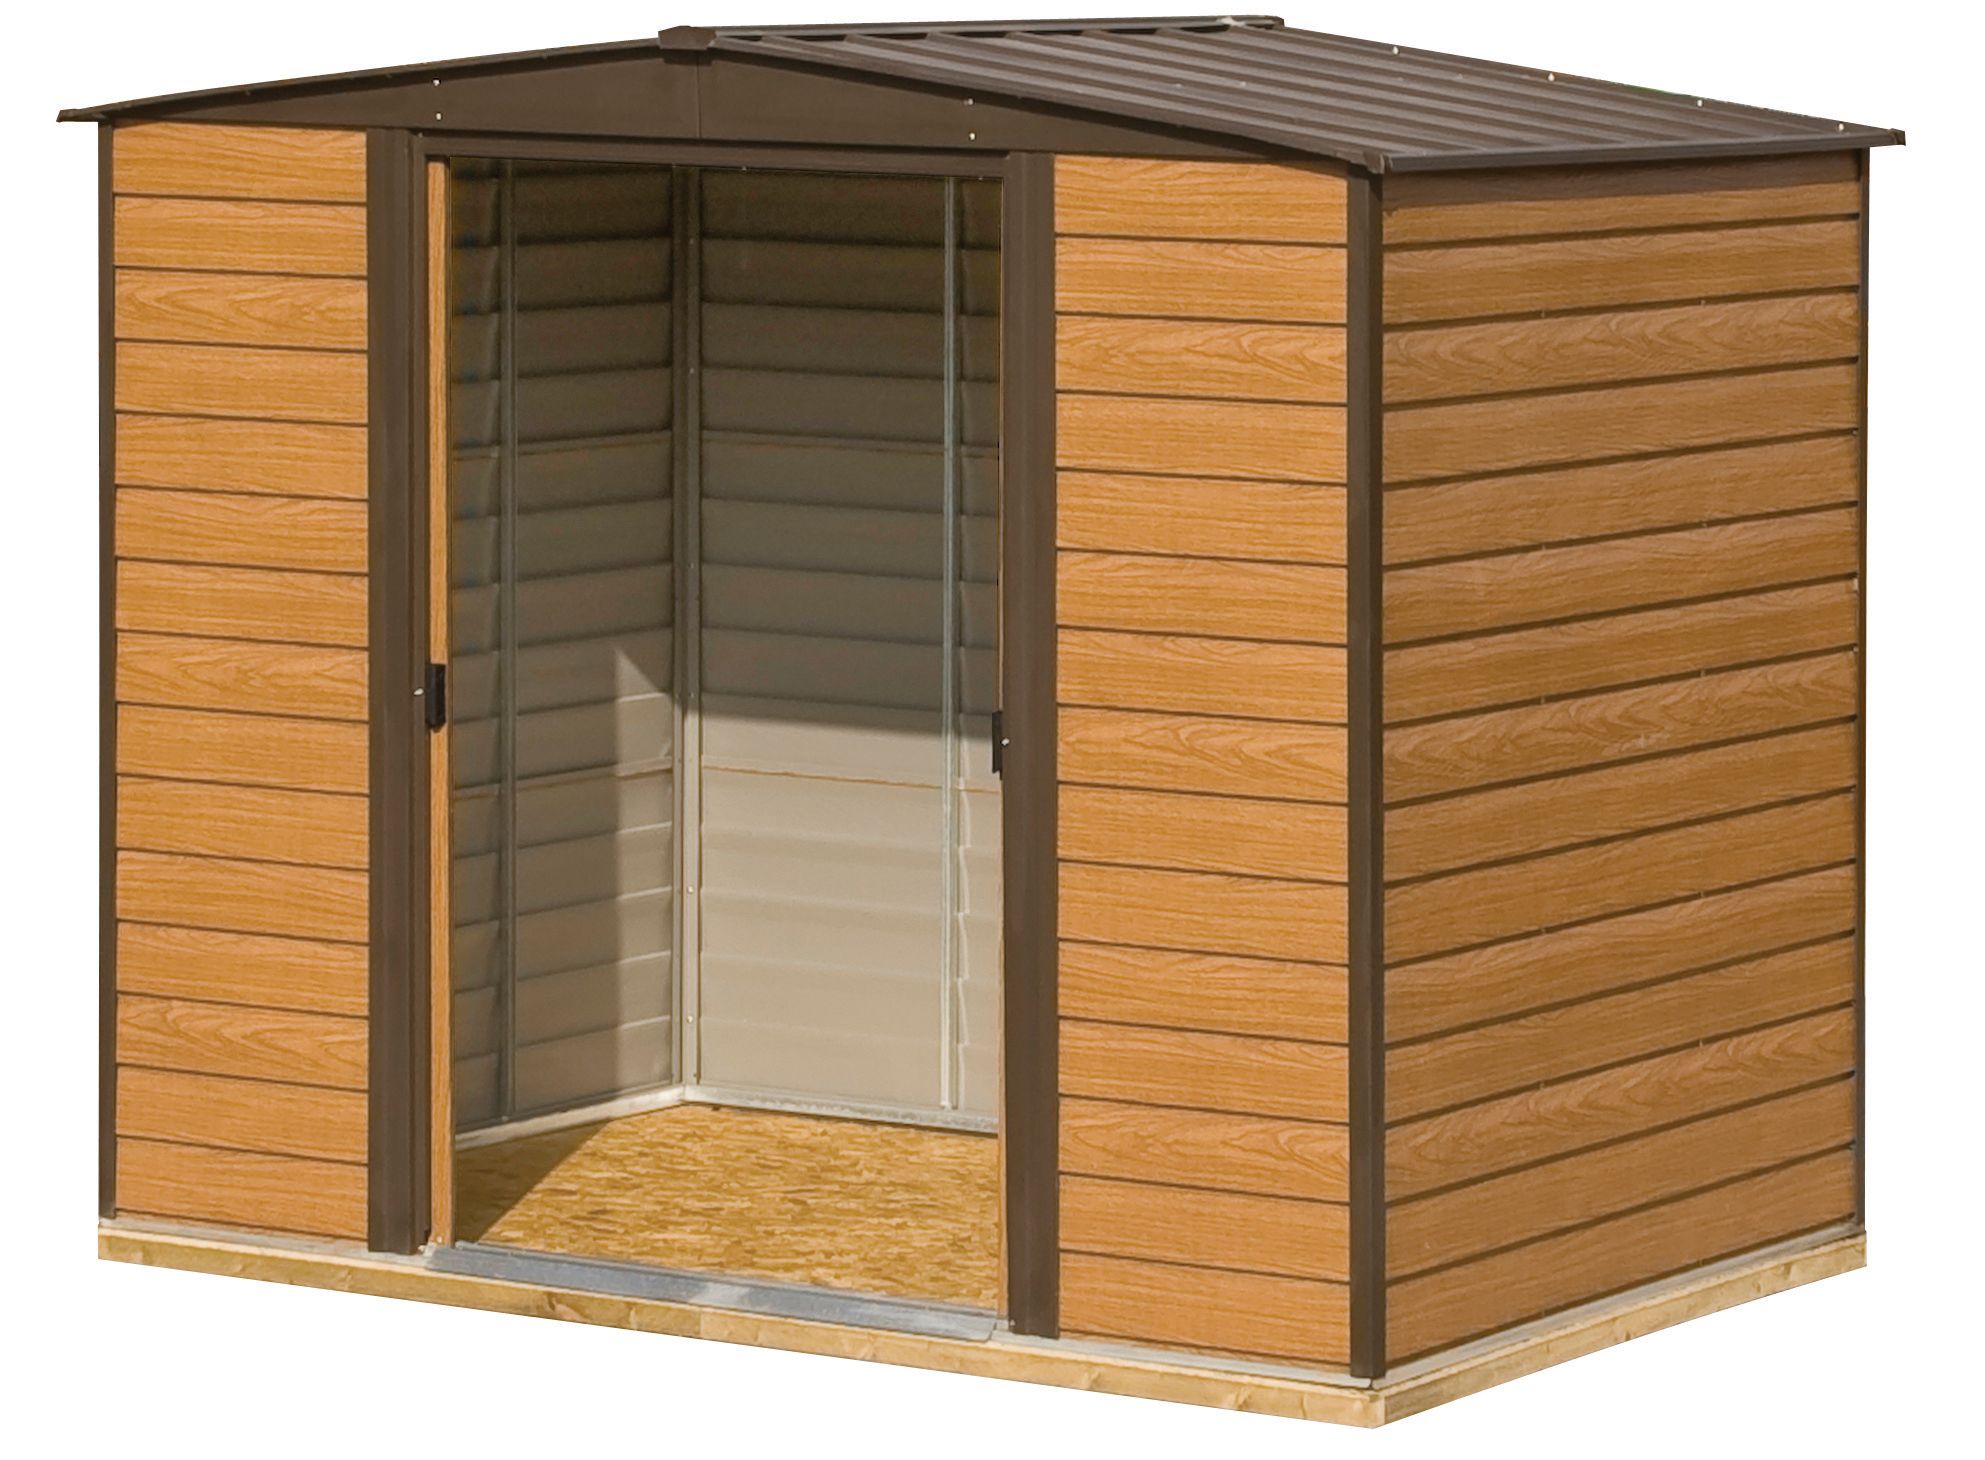 Image of Rowlinson Woodvale 10 x 6ft Large Double Door Metal Apex Shed including Floor